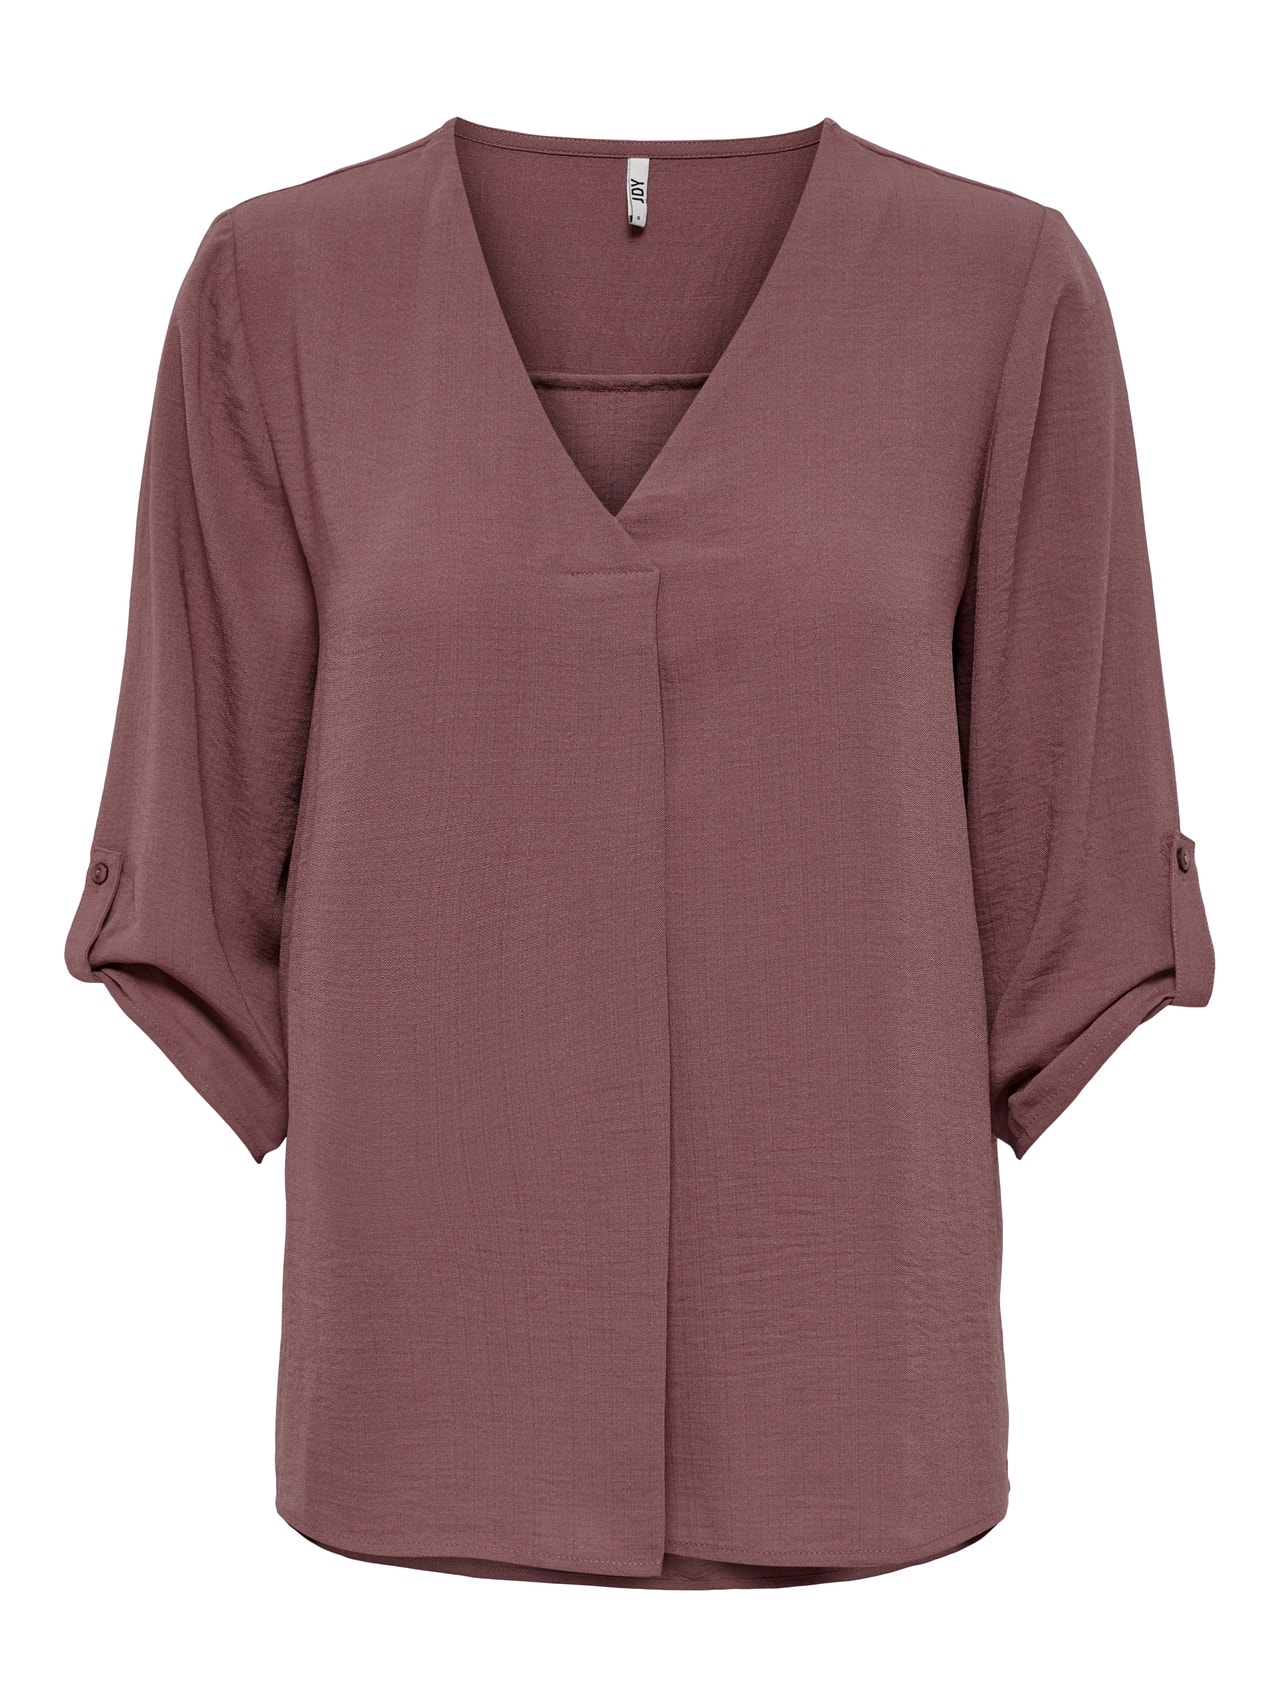 ONLY Solid colored 3/4 sleeved top -Rose Brown - 15226911